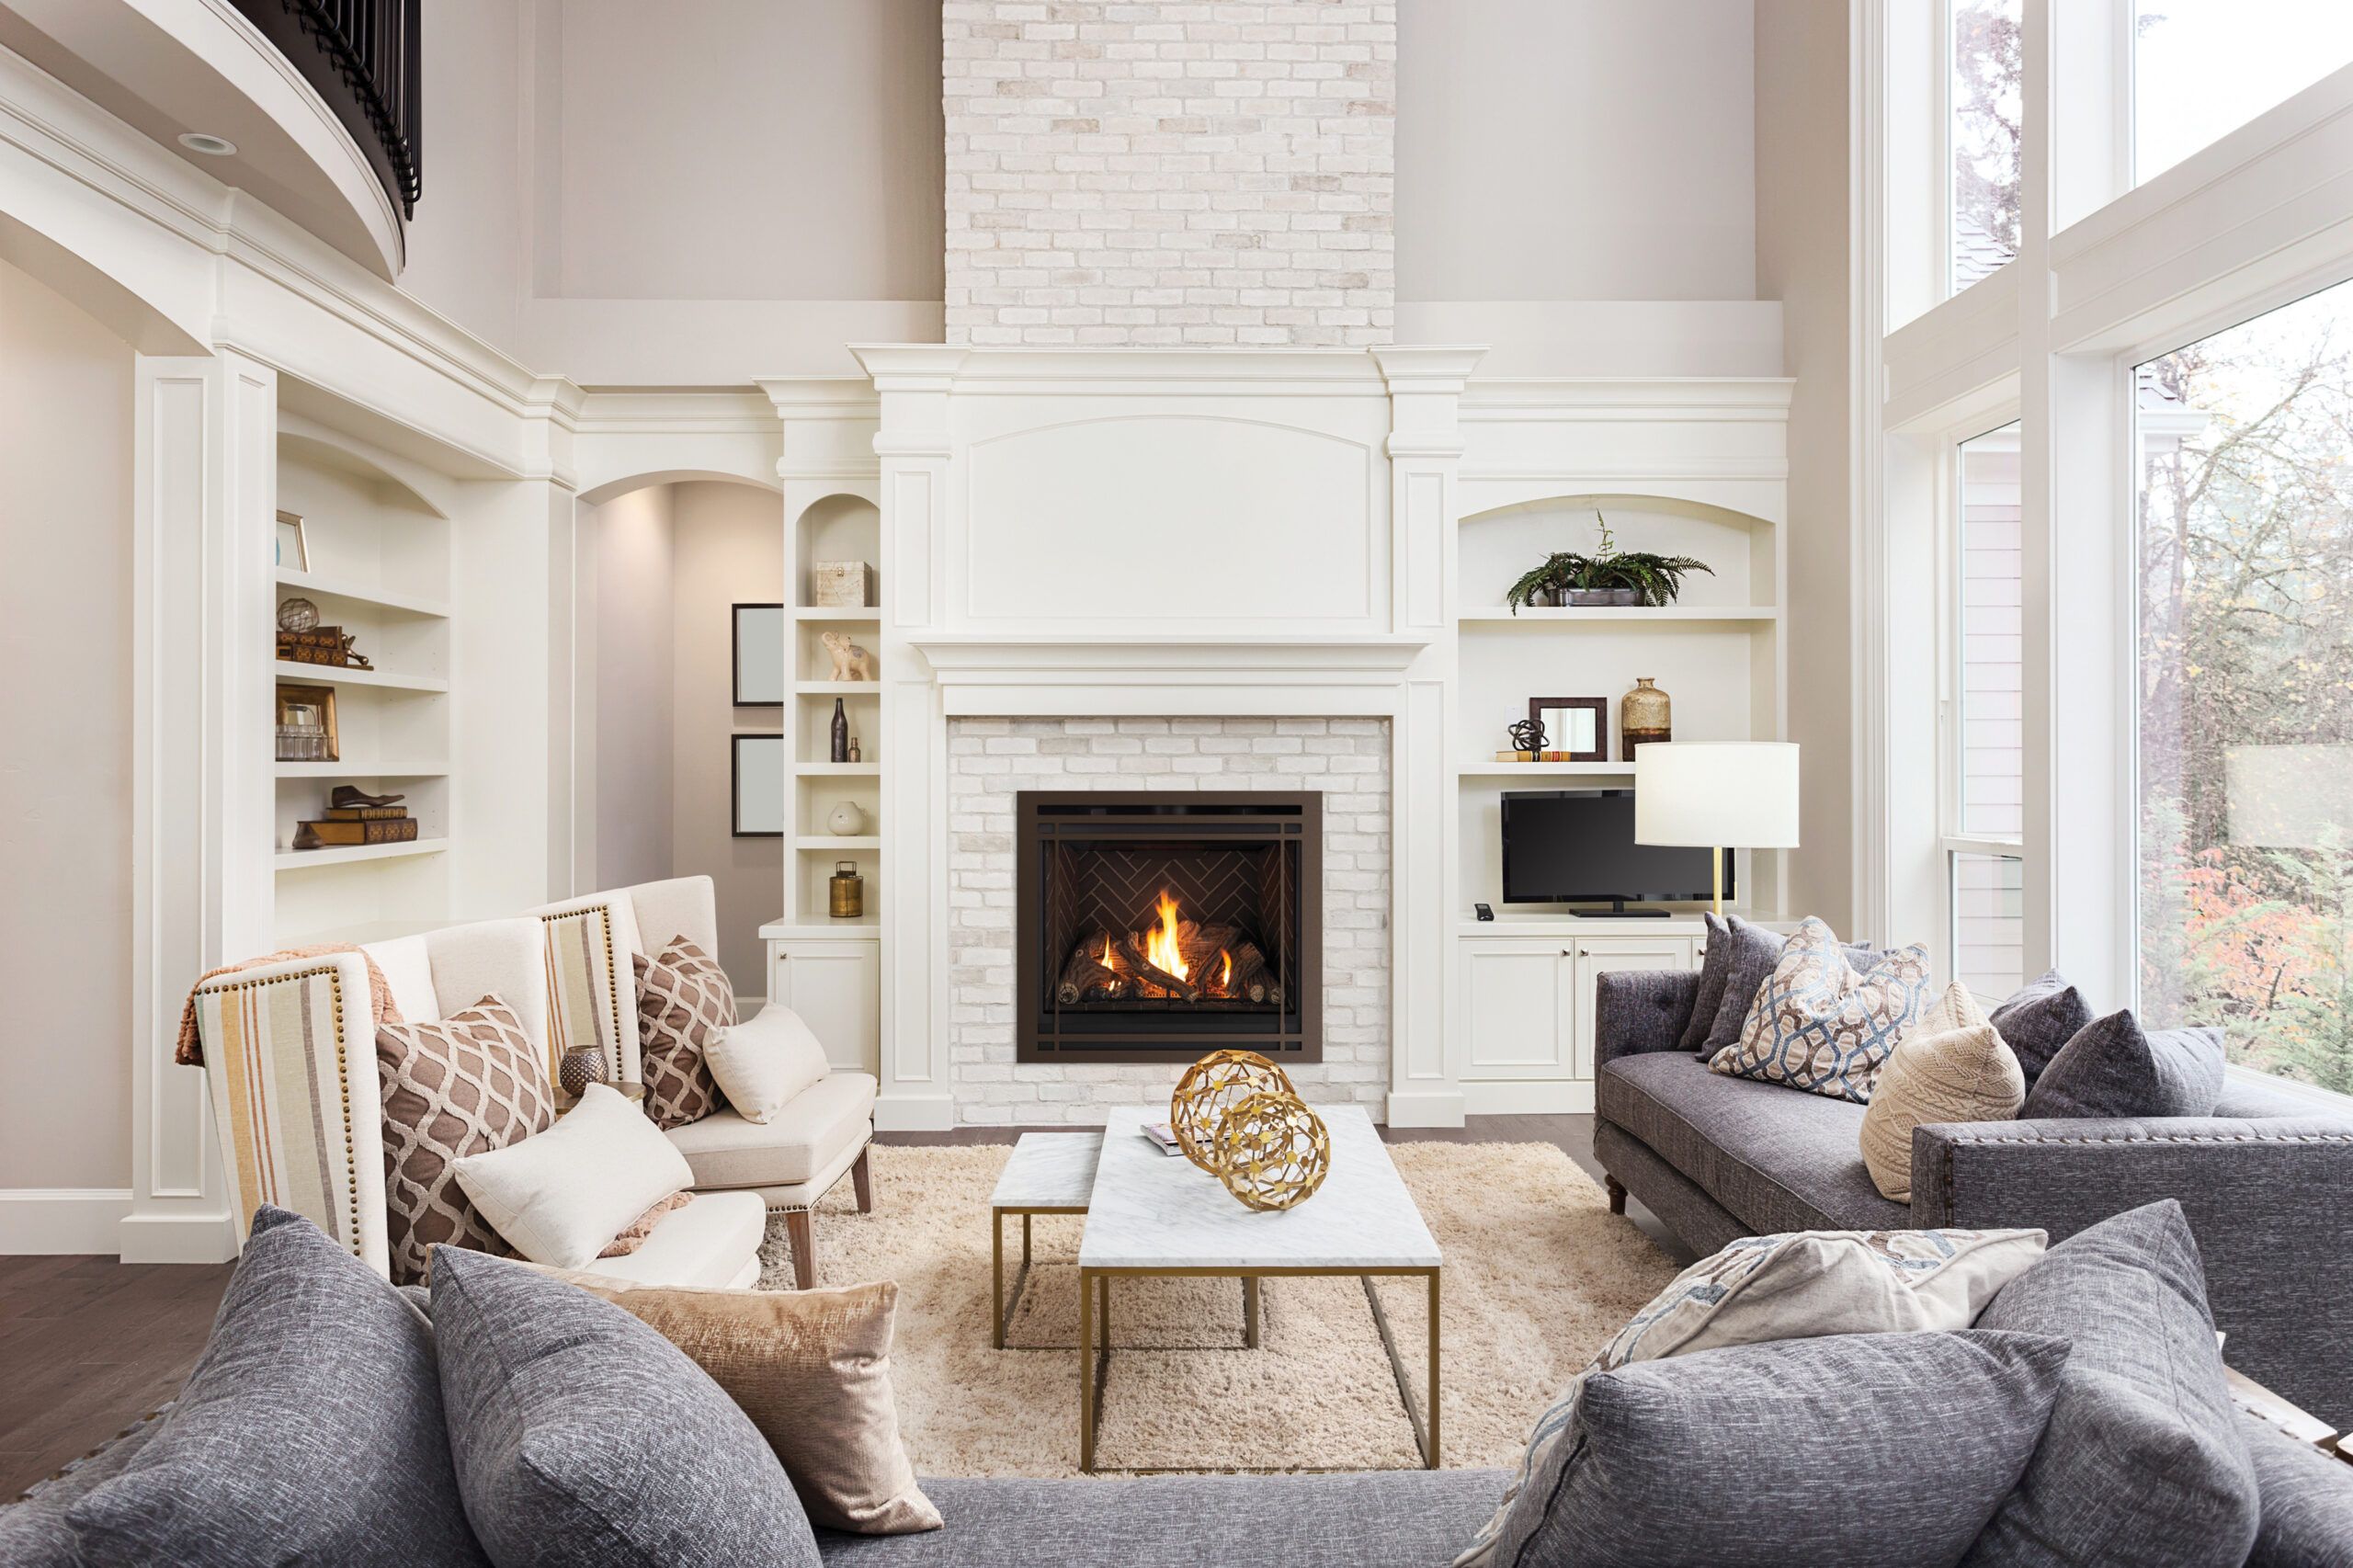 all about gas fireplaces: types, costs, and installation - this